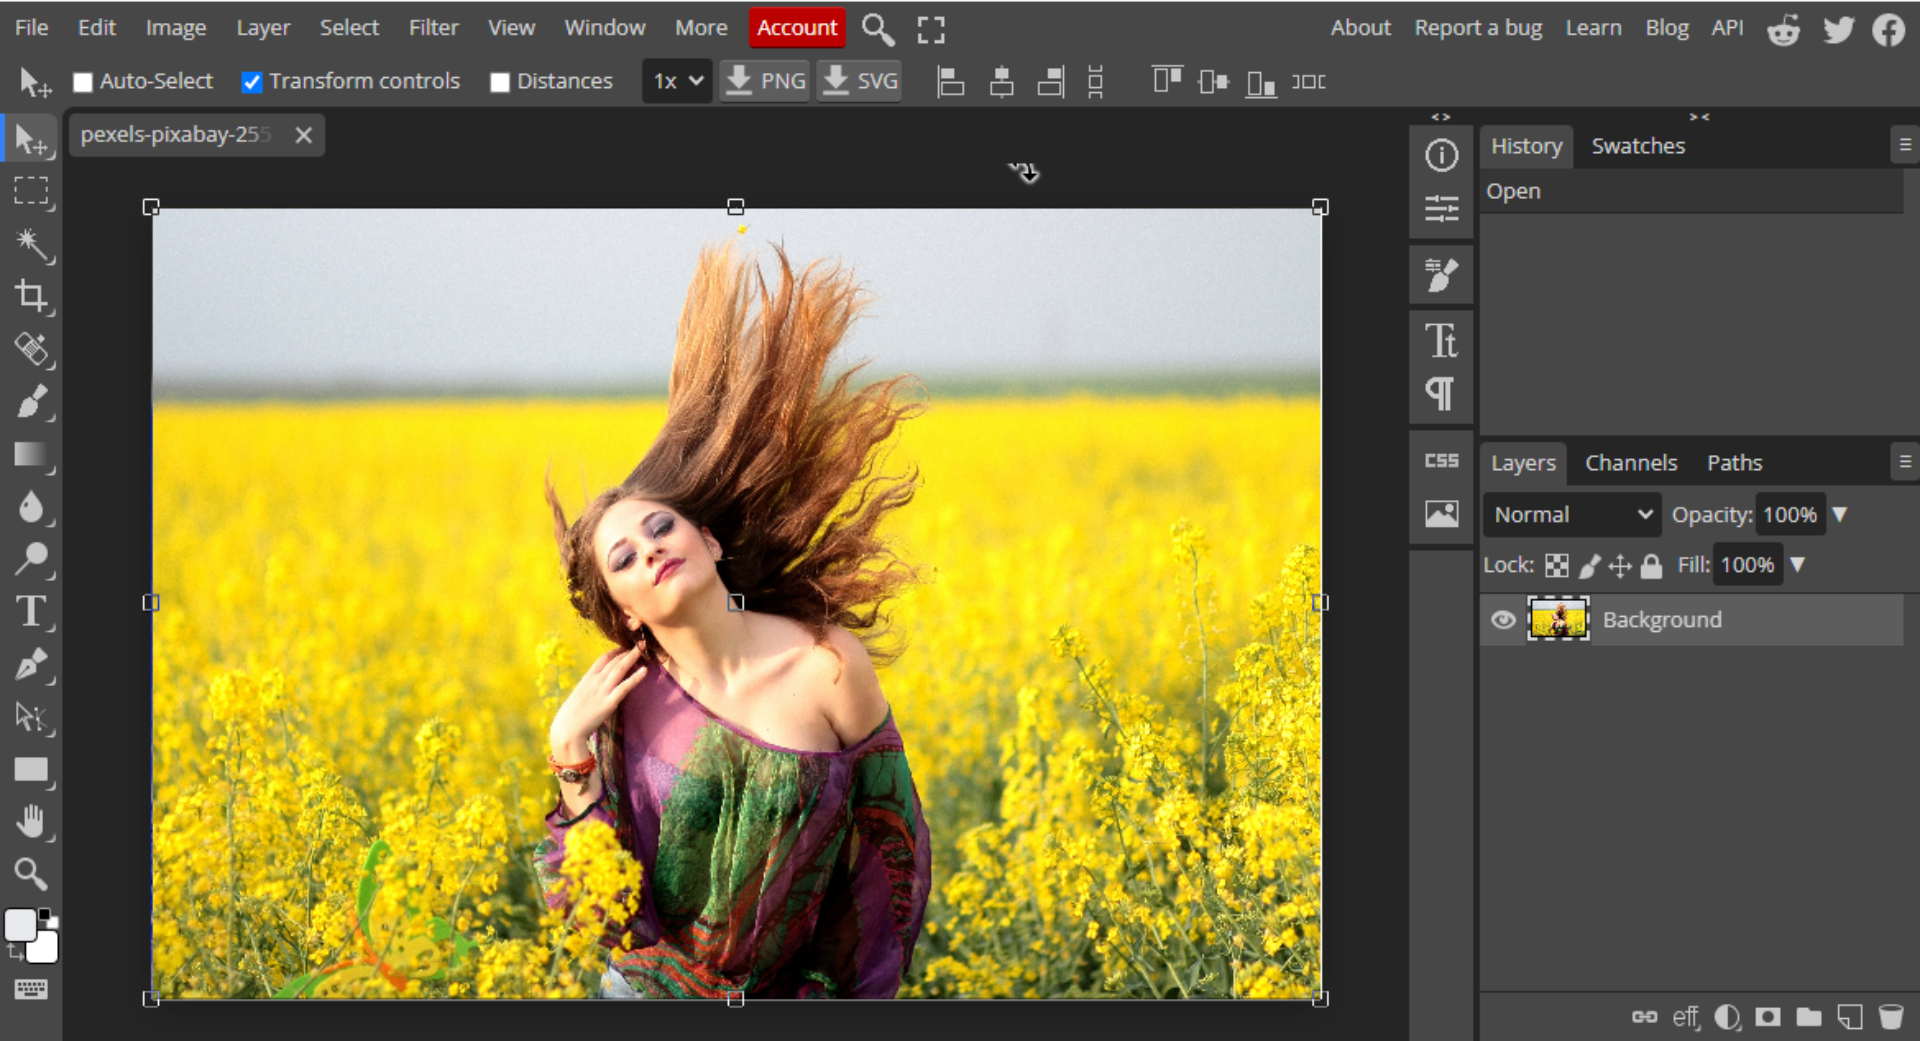 How to do photo editing in Photoshop without downloading(creativea2z)